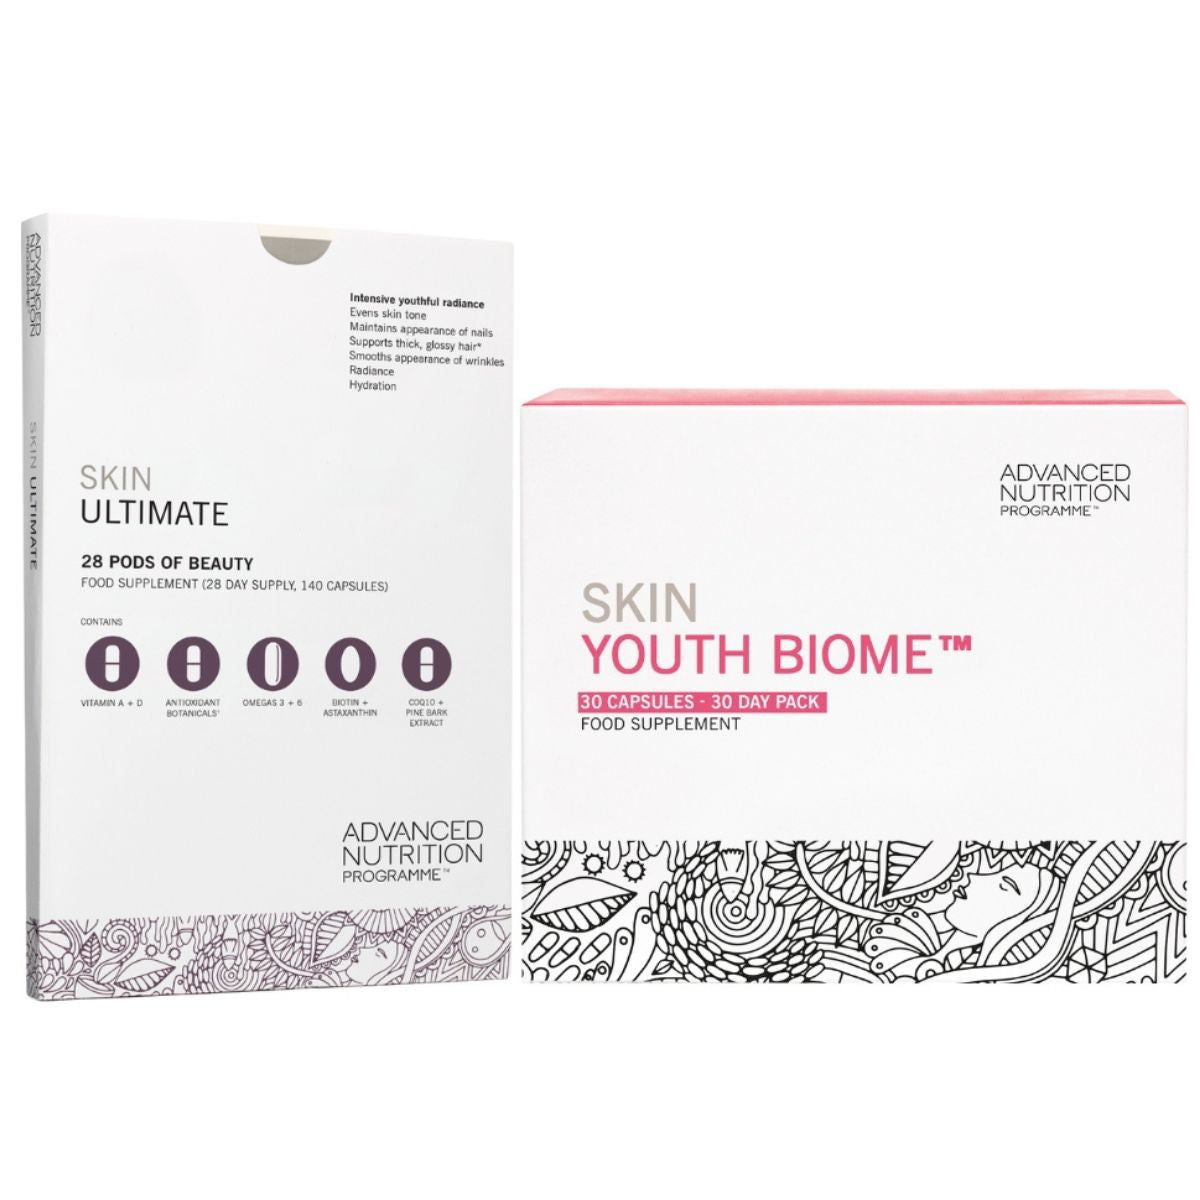 Advanced Nutrition Programme Skin Ultimate plus Complimentary Skin Youth Biome 30 Day